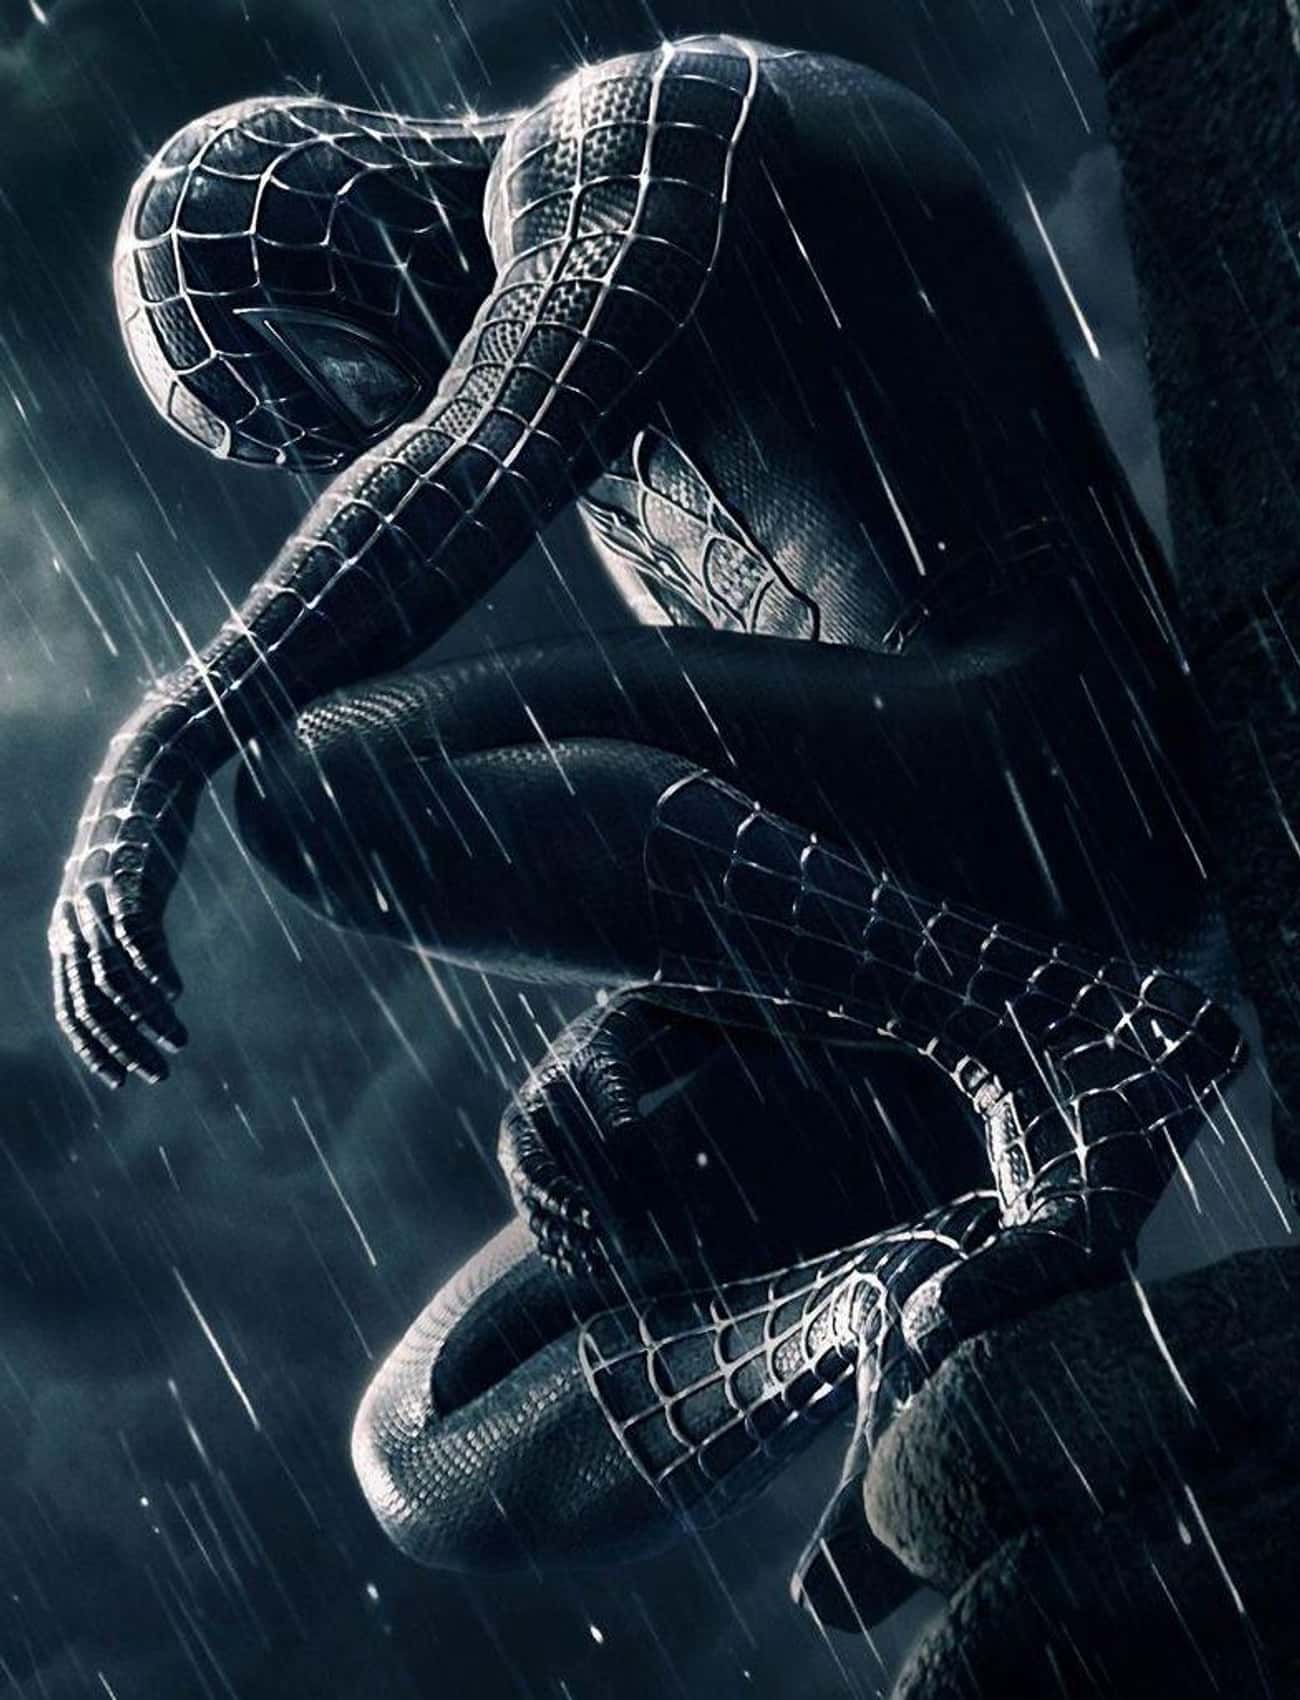 The Basic Venom Backstory Is Well-Known, And Has Been Portrayed In Multiple Formats